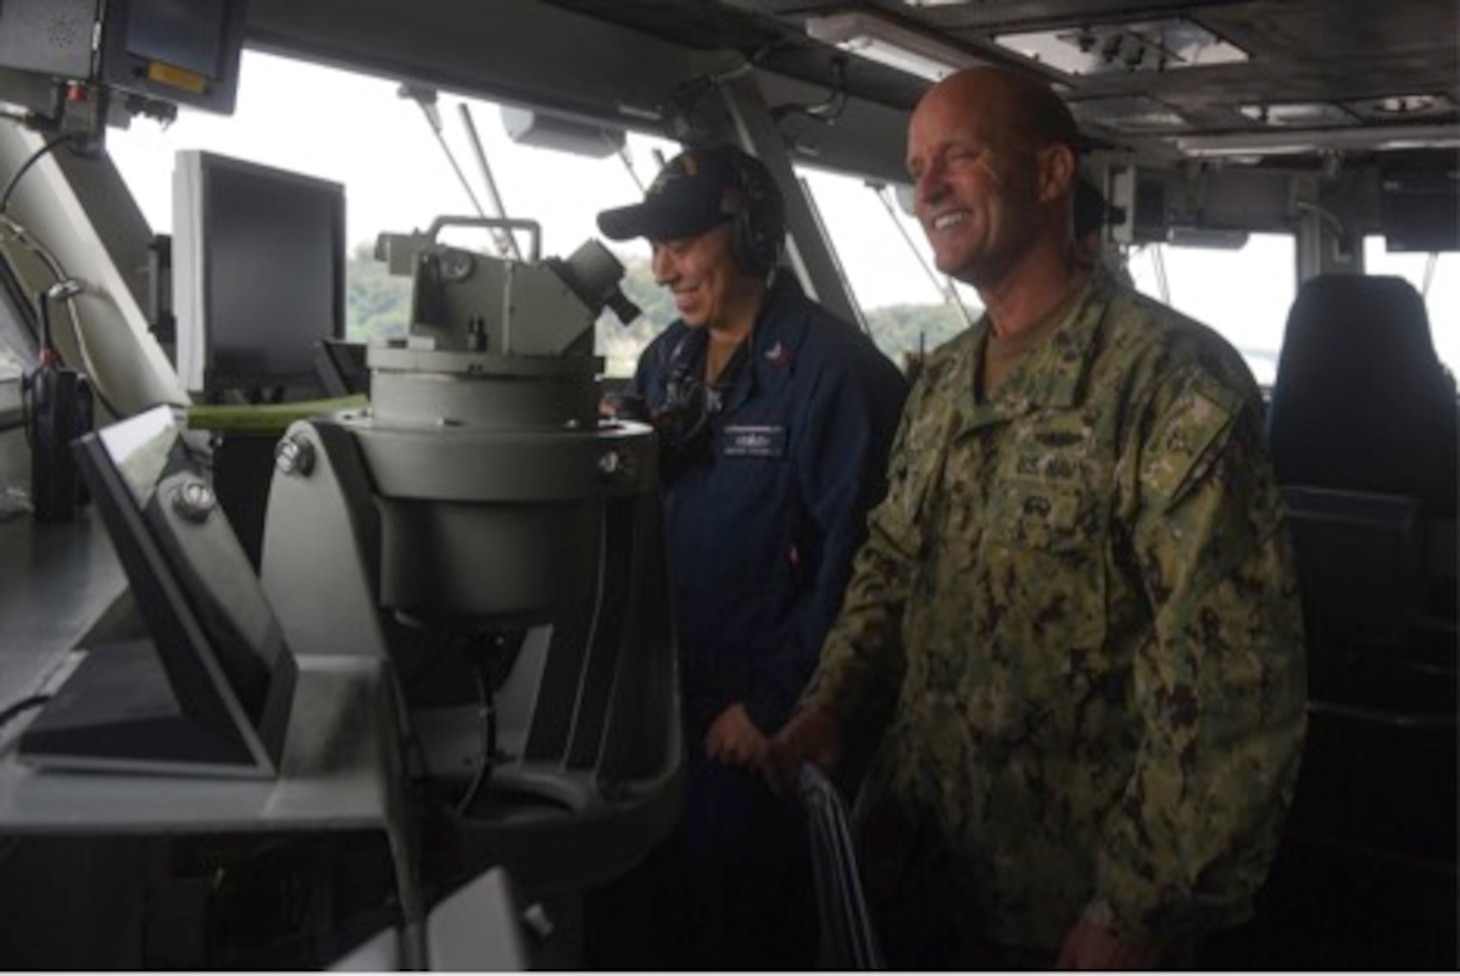 PHILIPPINE SEA (September 14, 2019) Vice Adm. William R. Merz, Commander, 7th Fleet, speaks with a Sailor on the navigation bridge while touring the Navy’s forward-deployed aircraft carrier USS Ronald Reagan (CVN 76). USS Ronald Reagan, the flagship of Carrier Strike Group 5, provides a combat-ready force that protects and defends the collective maritime interests of its allies and partners in the Indo-Asia-Pacific region.